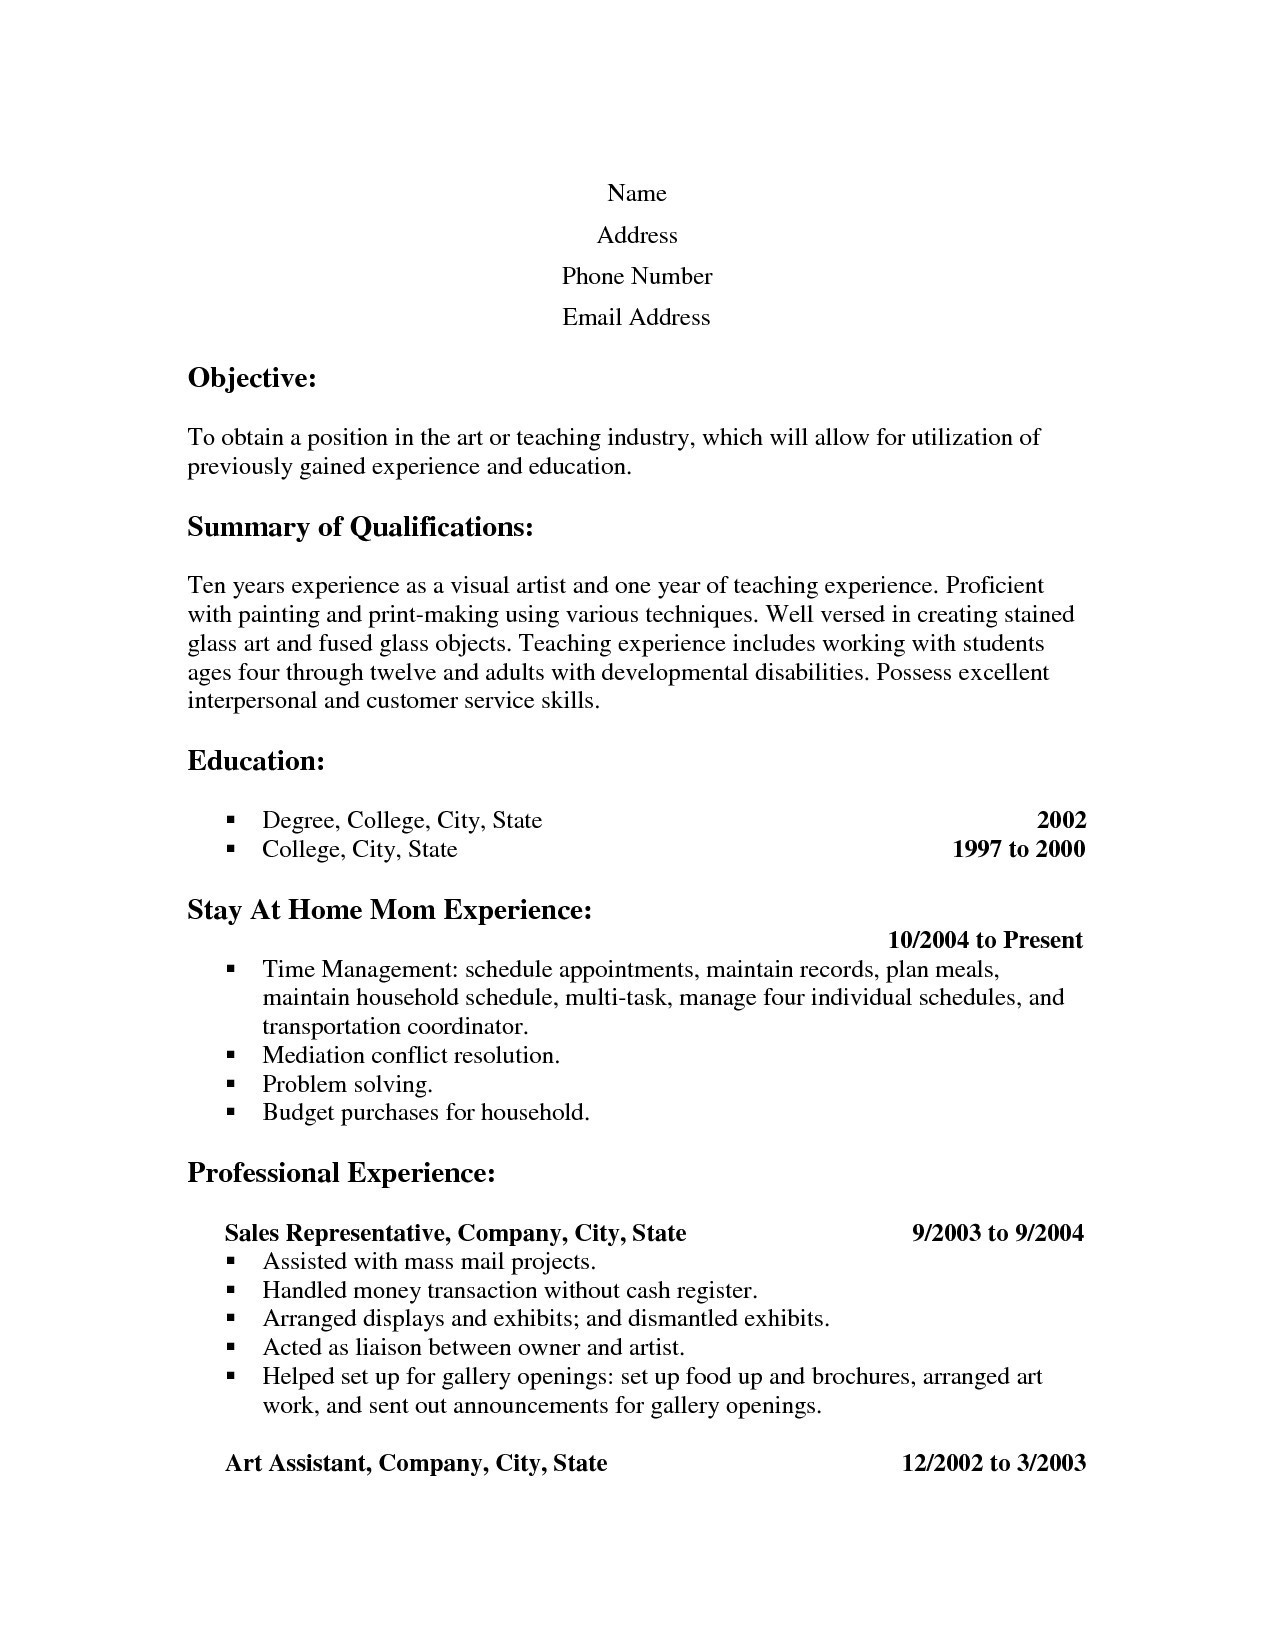 Resume Template for Mothers Returning to Work Resume Examples for Stay at Home Moms – Free Resume Templates